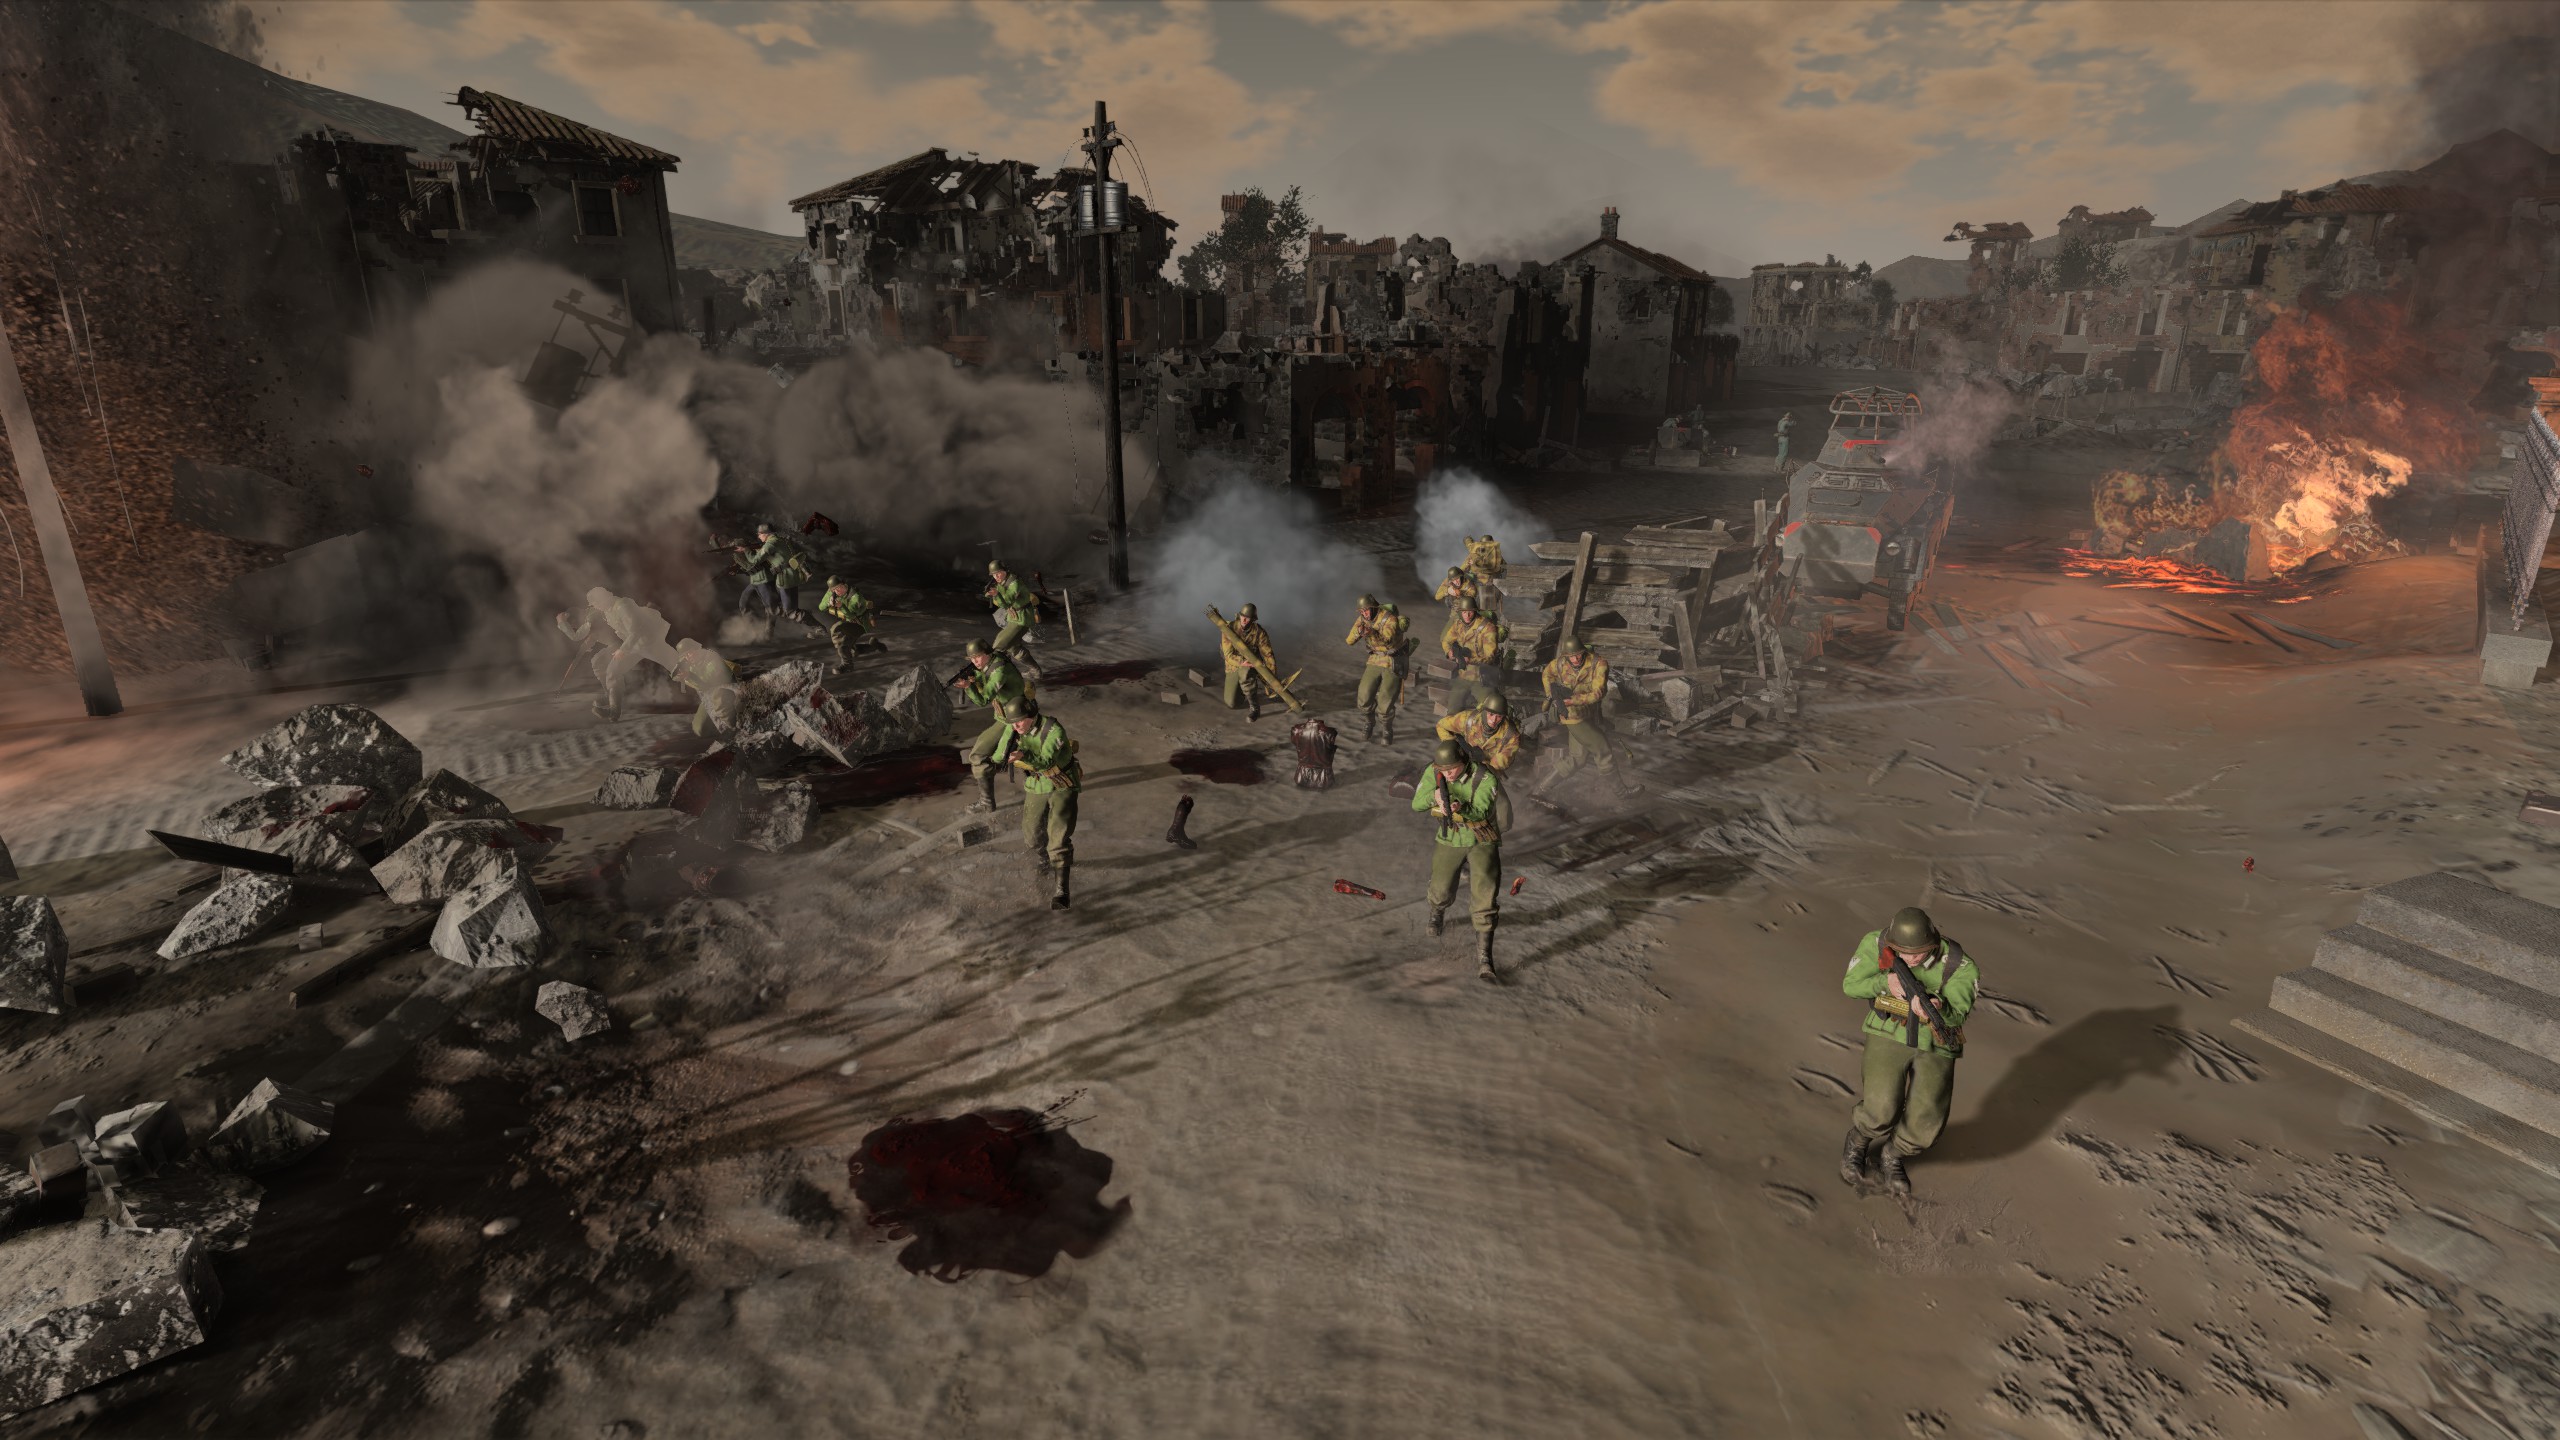 Company of Heroes 3 soldiers running through a ruined city